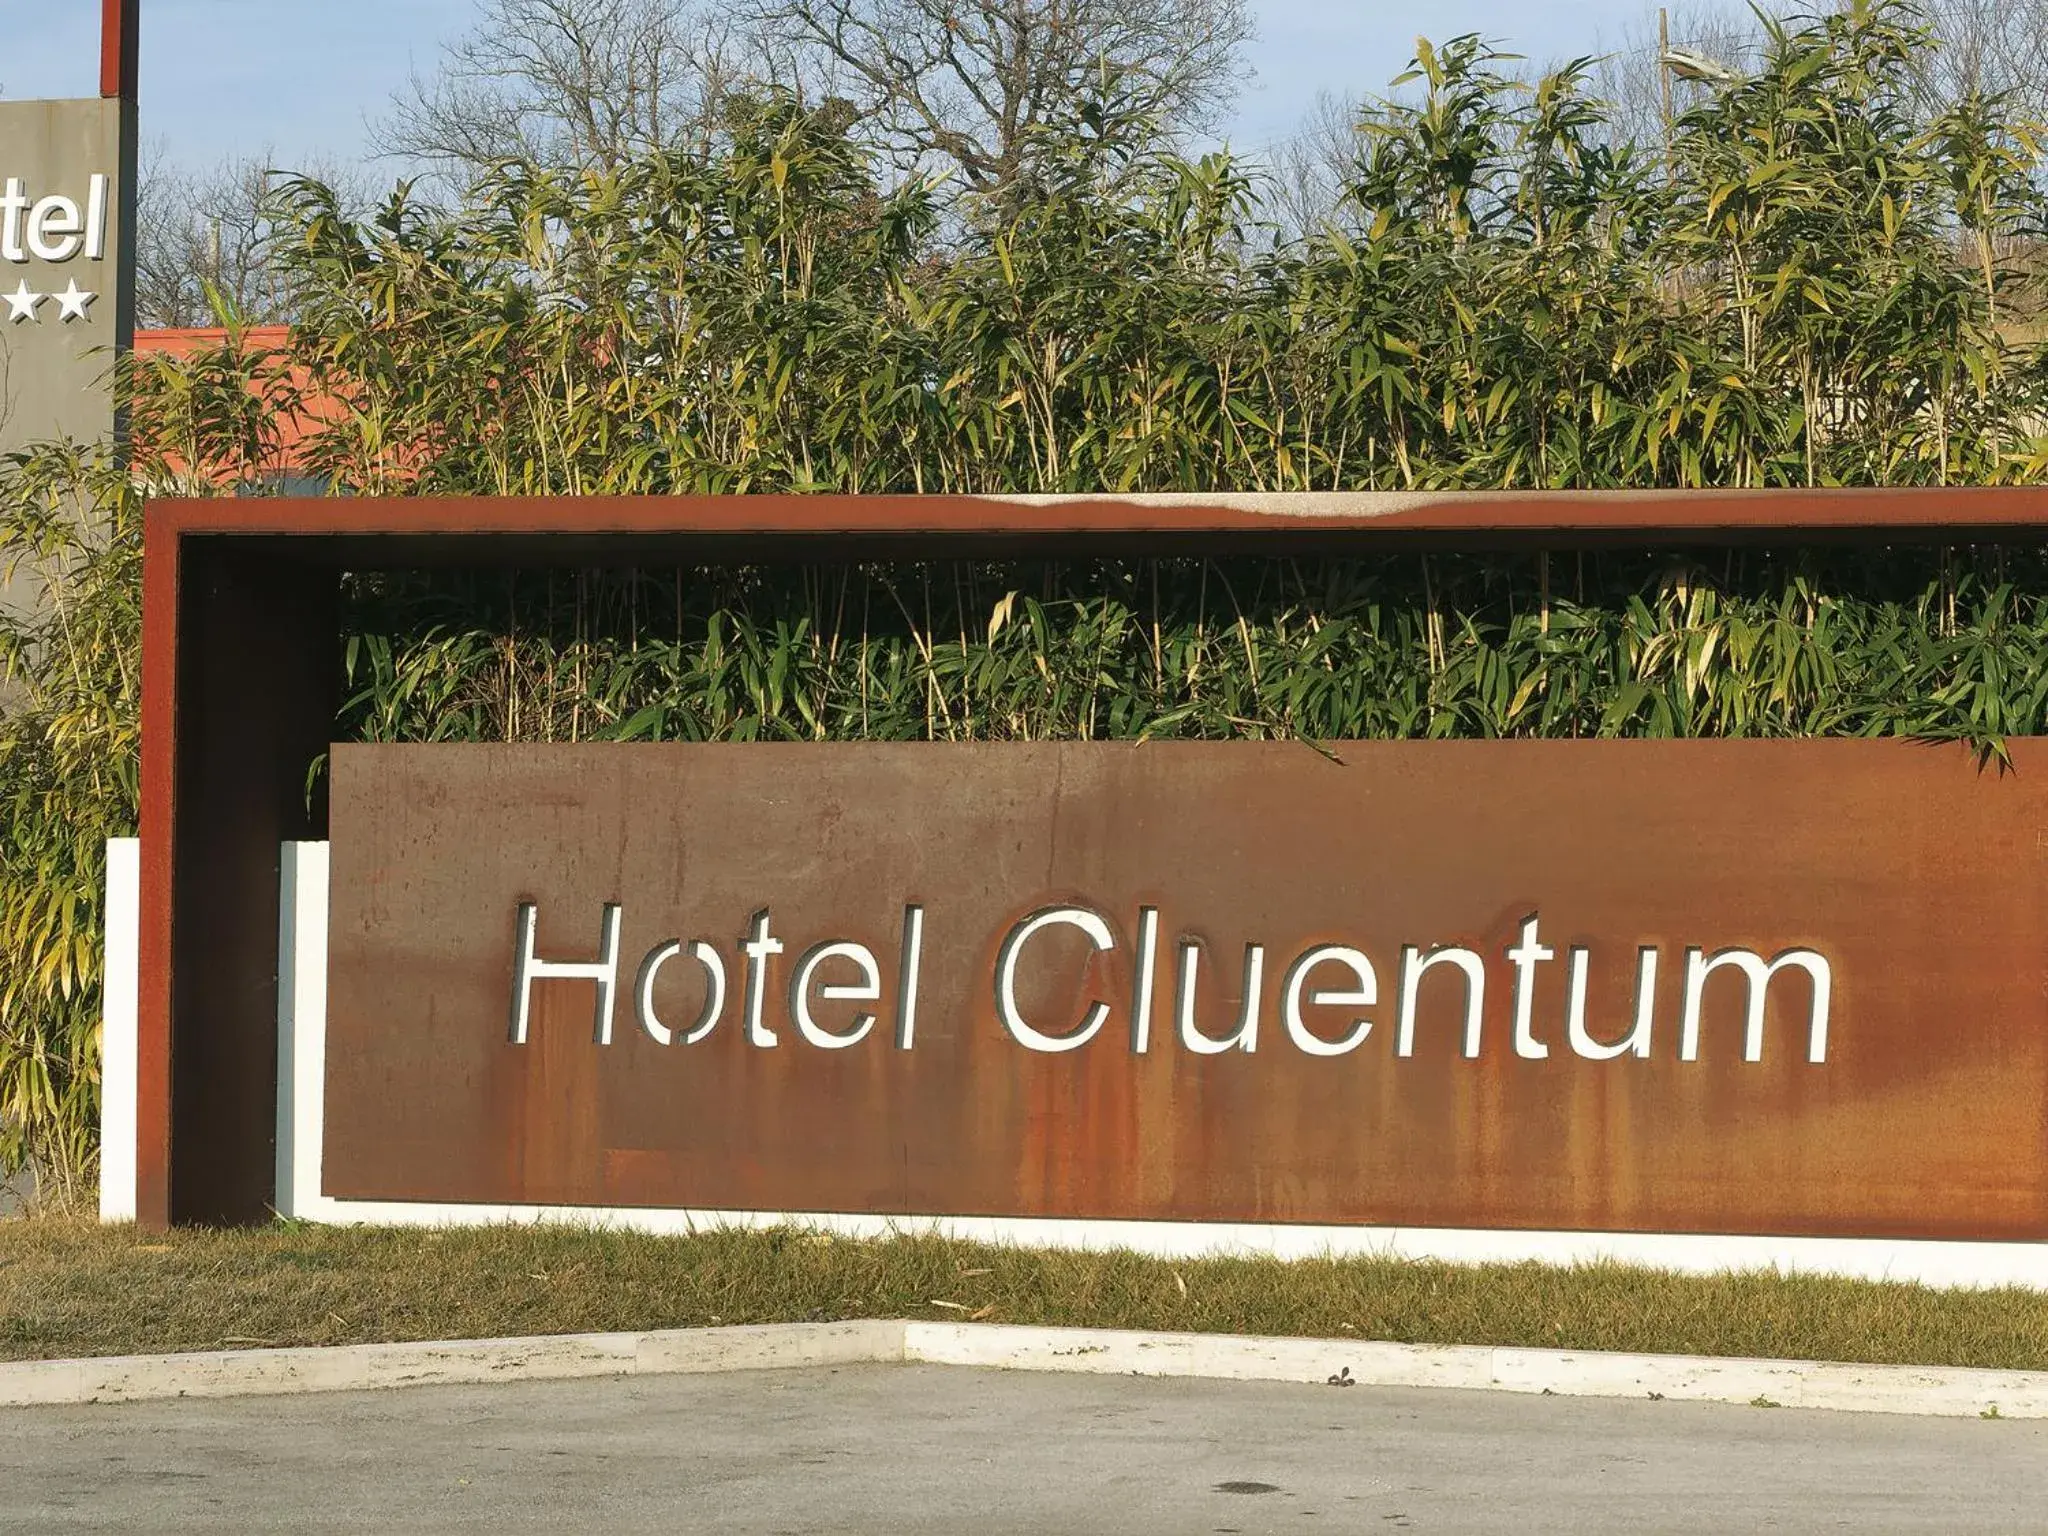 Property logo or sign in Hotel Cluentum